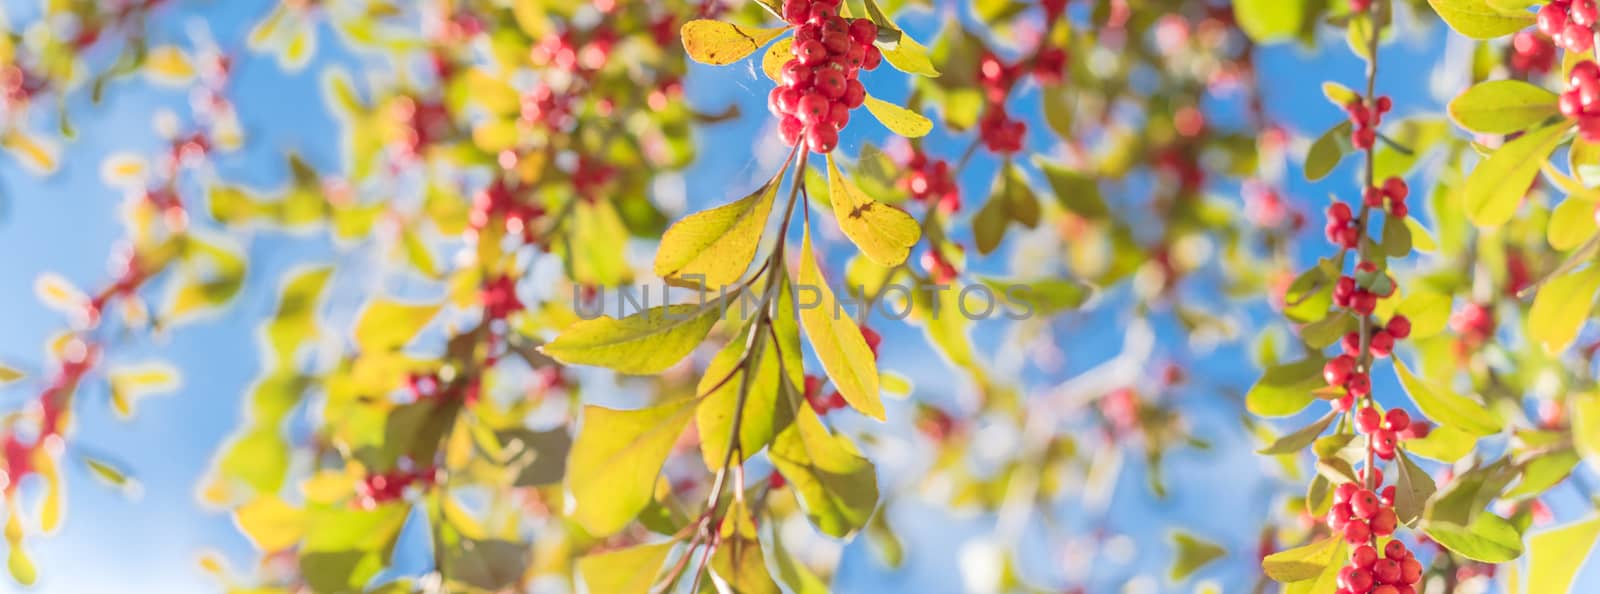 Panoramic beautiful Texas Winterberry Ilex Decidua red fruits on tree branches on sunny fall day by trongnguyen